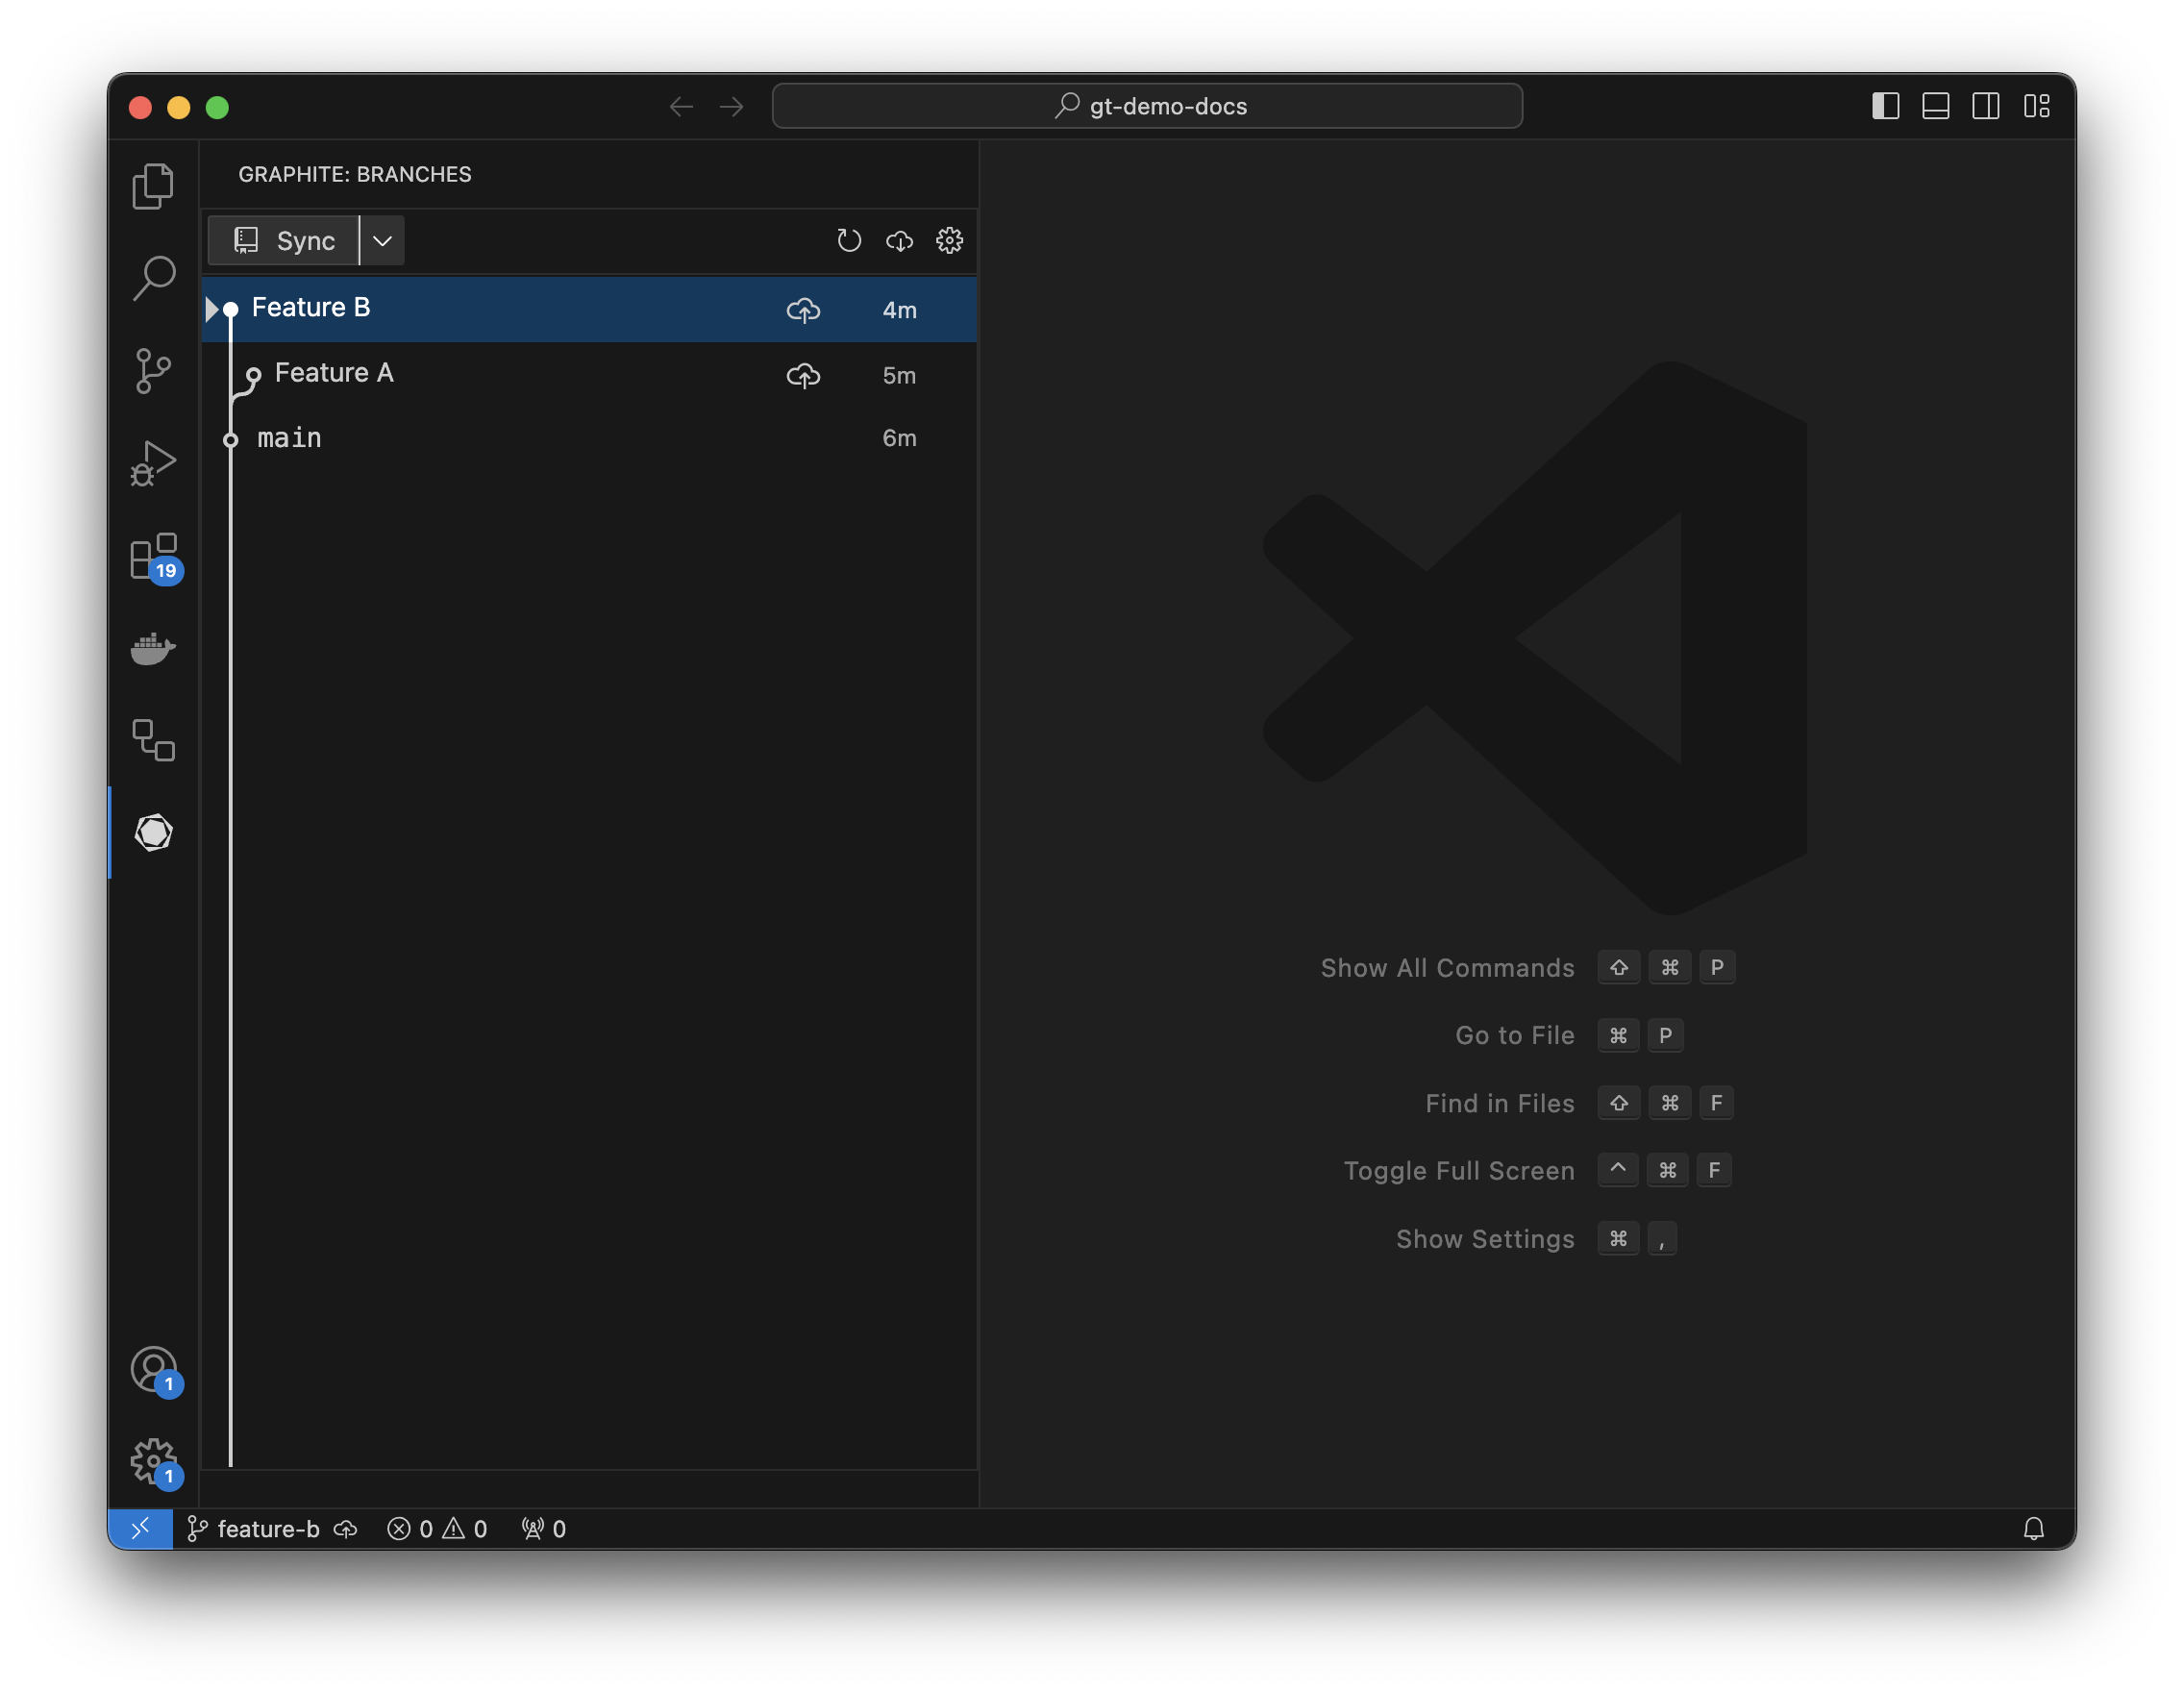 The Graphite VS Code extension with two branches "Feature A" and "Feature B".